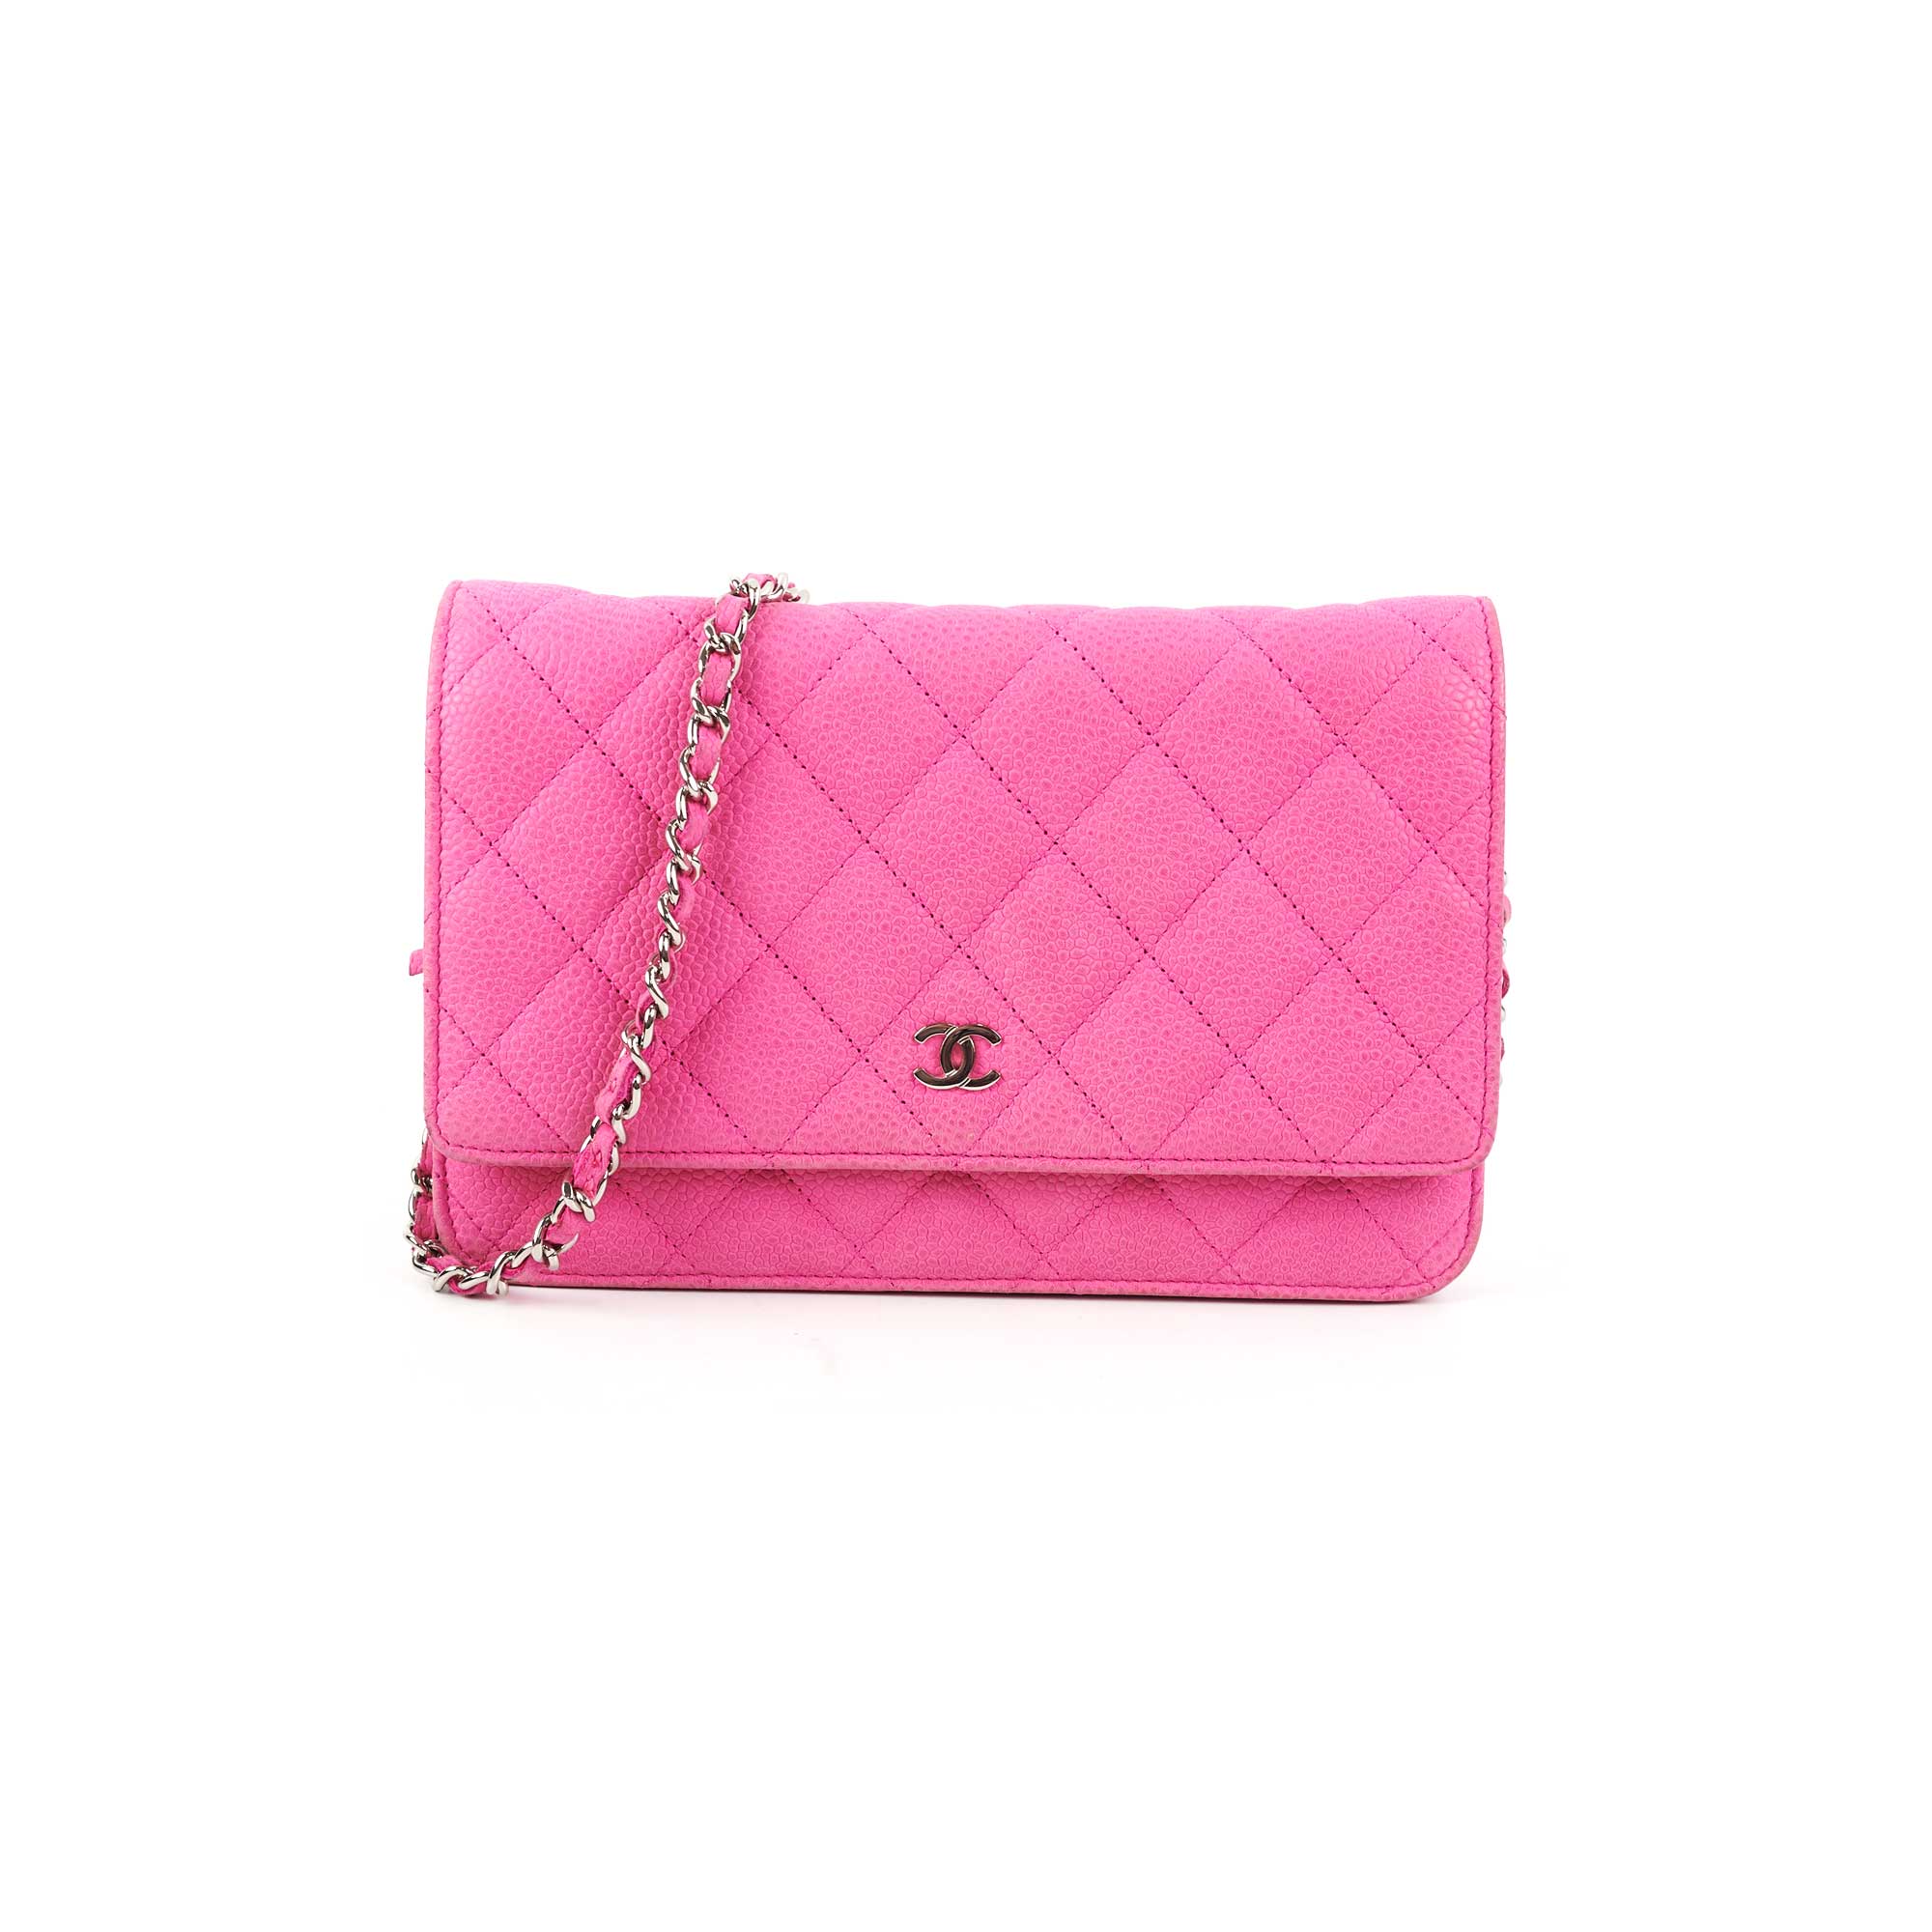 Chanel Pink Wallet On Chain WOC Bag - THE PURSE AFFAIR